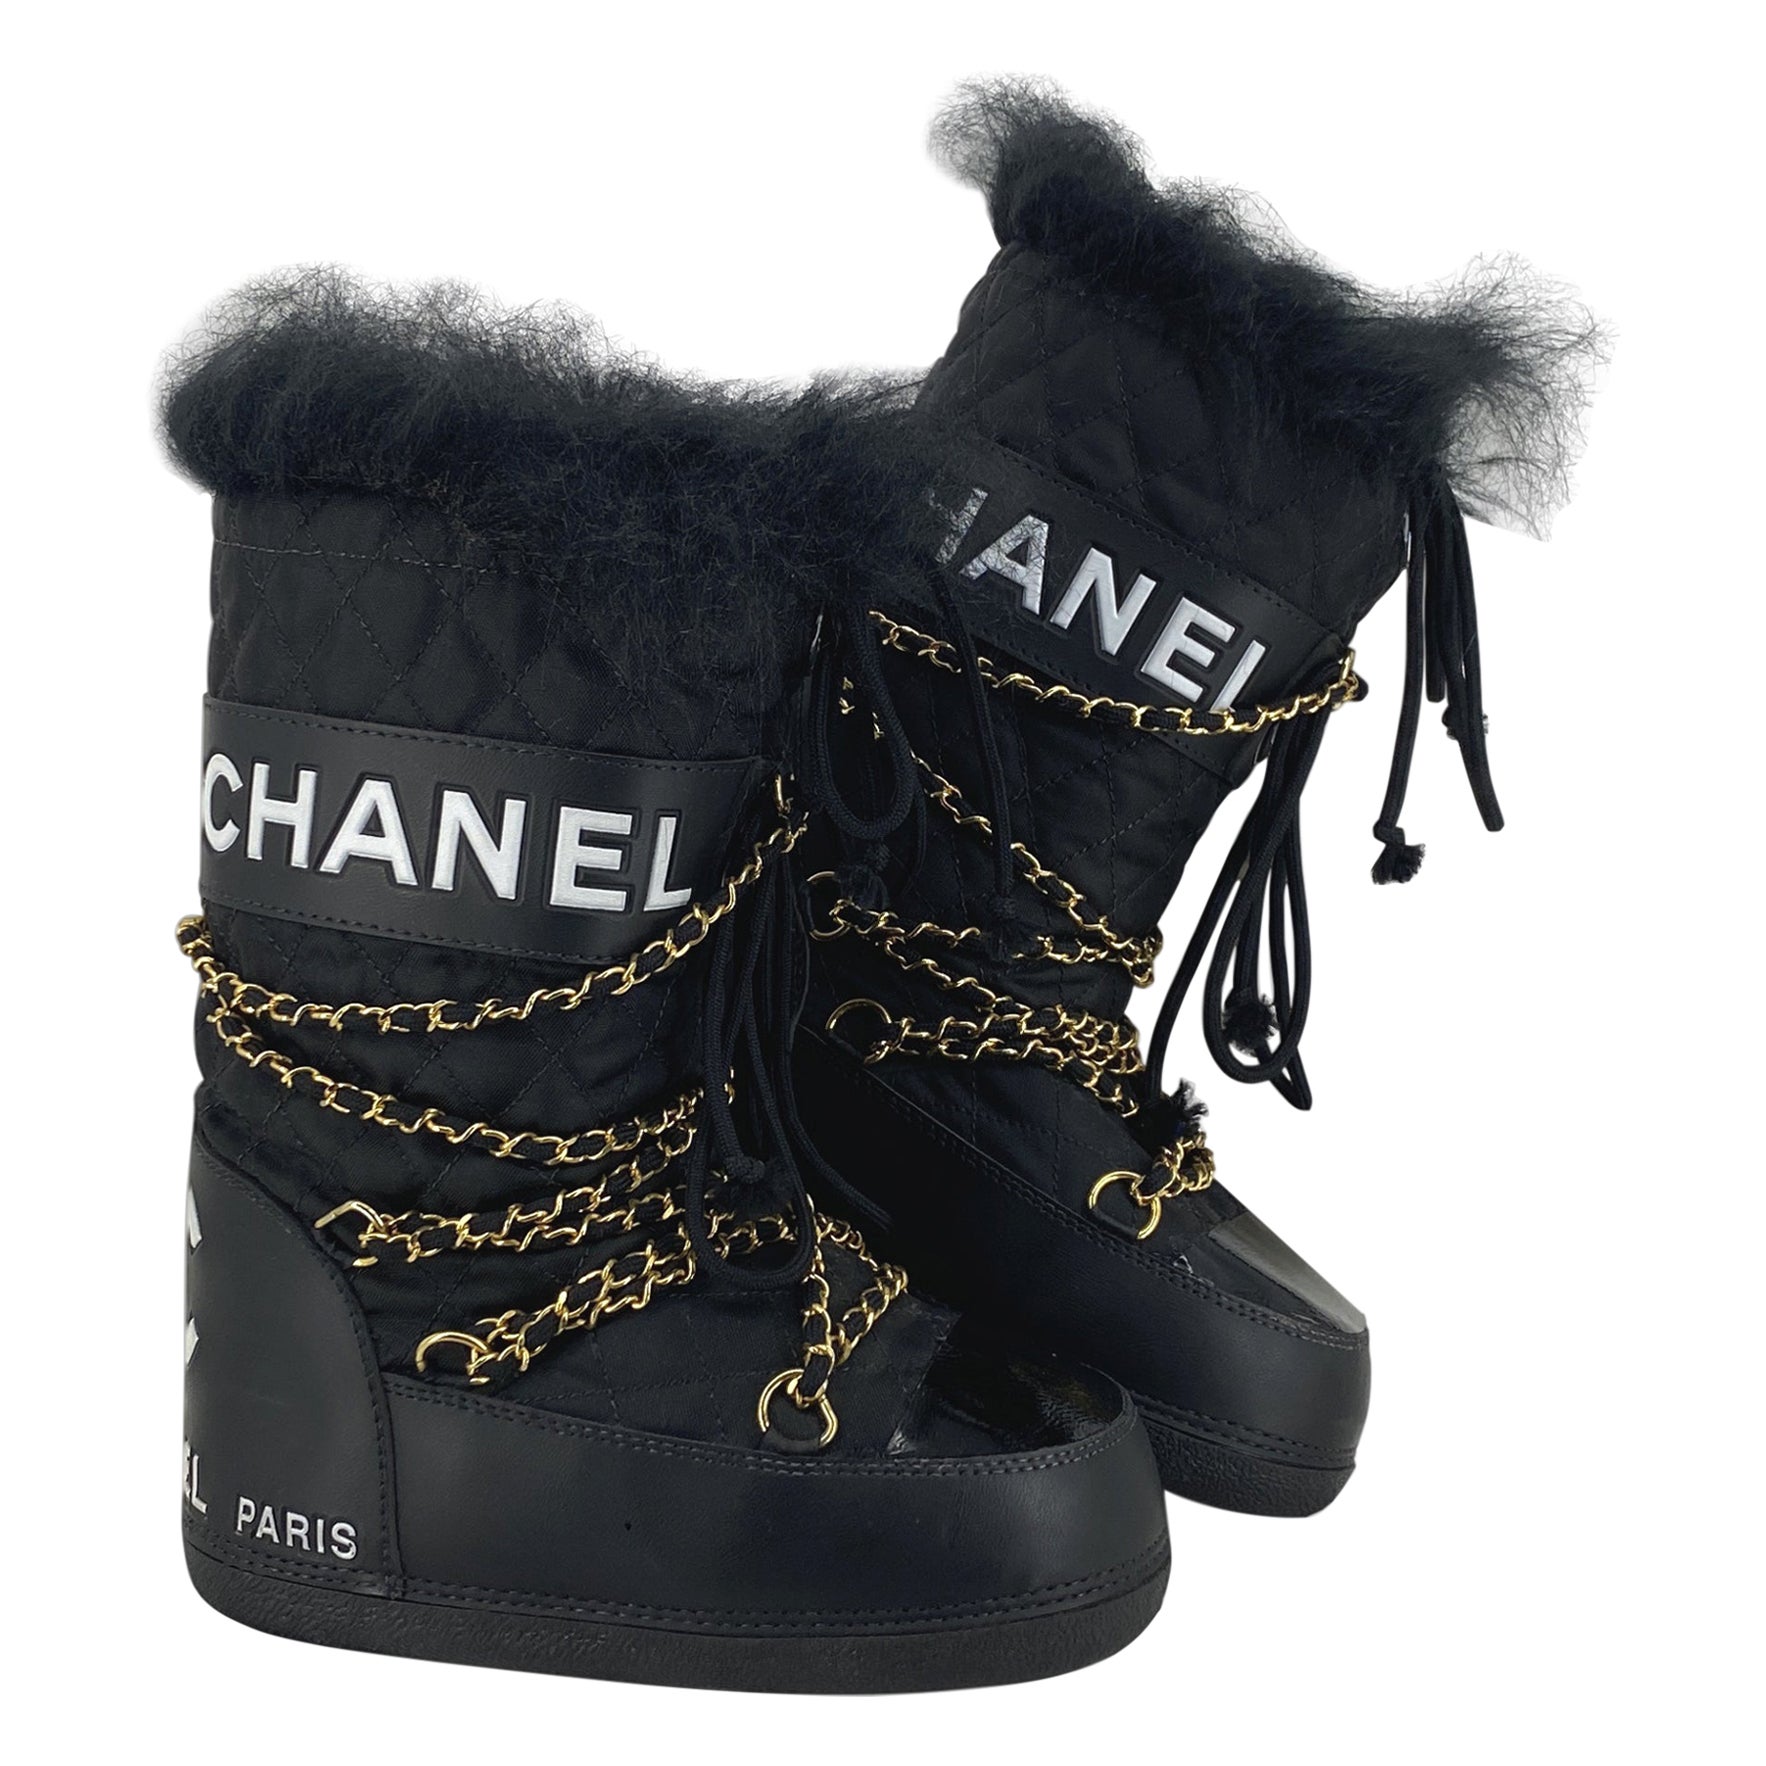 Chanel Moon Boots - For Sale on 1stDibs